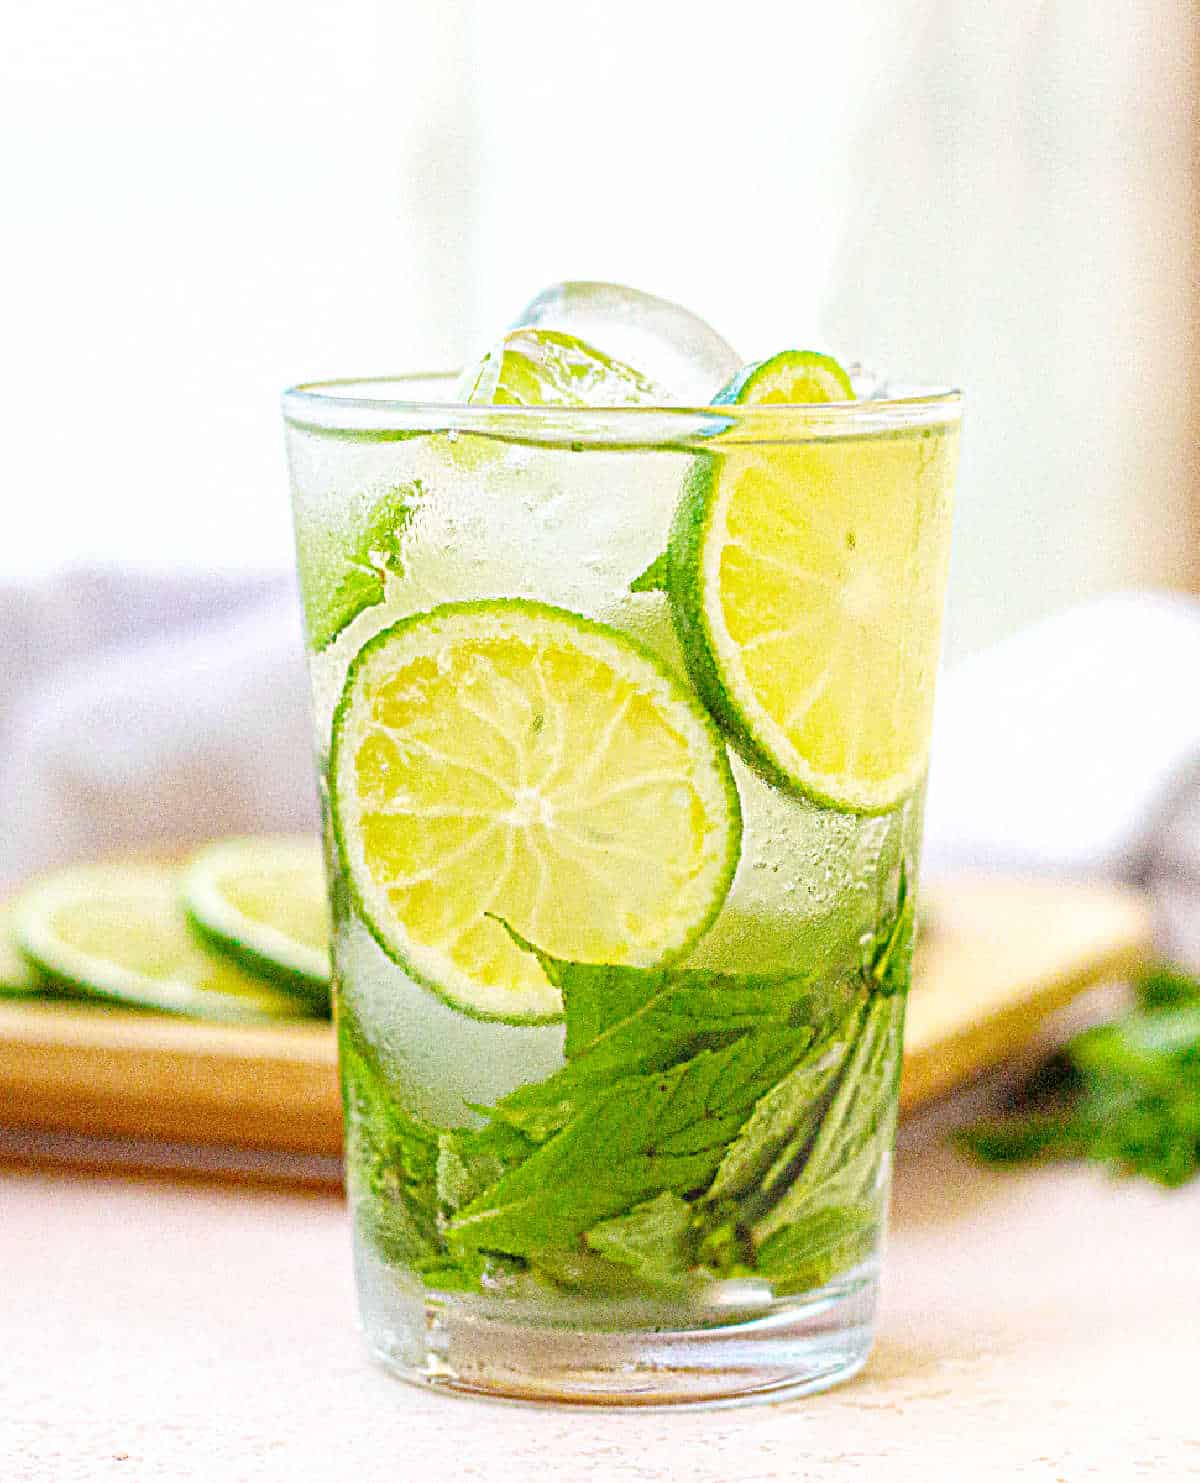 Singles glass with cucumber lime water and mint leaves. Light colored background.